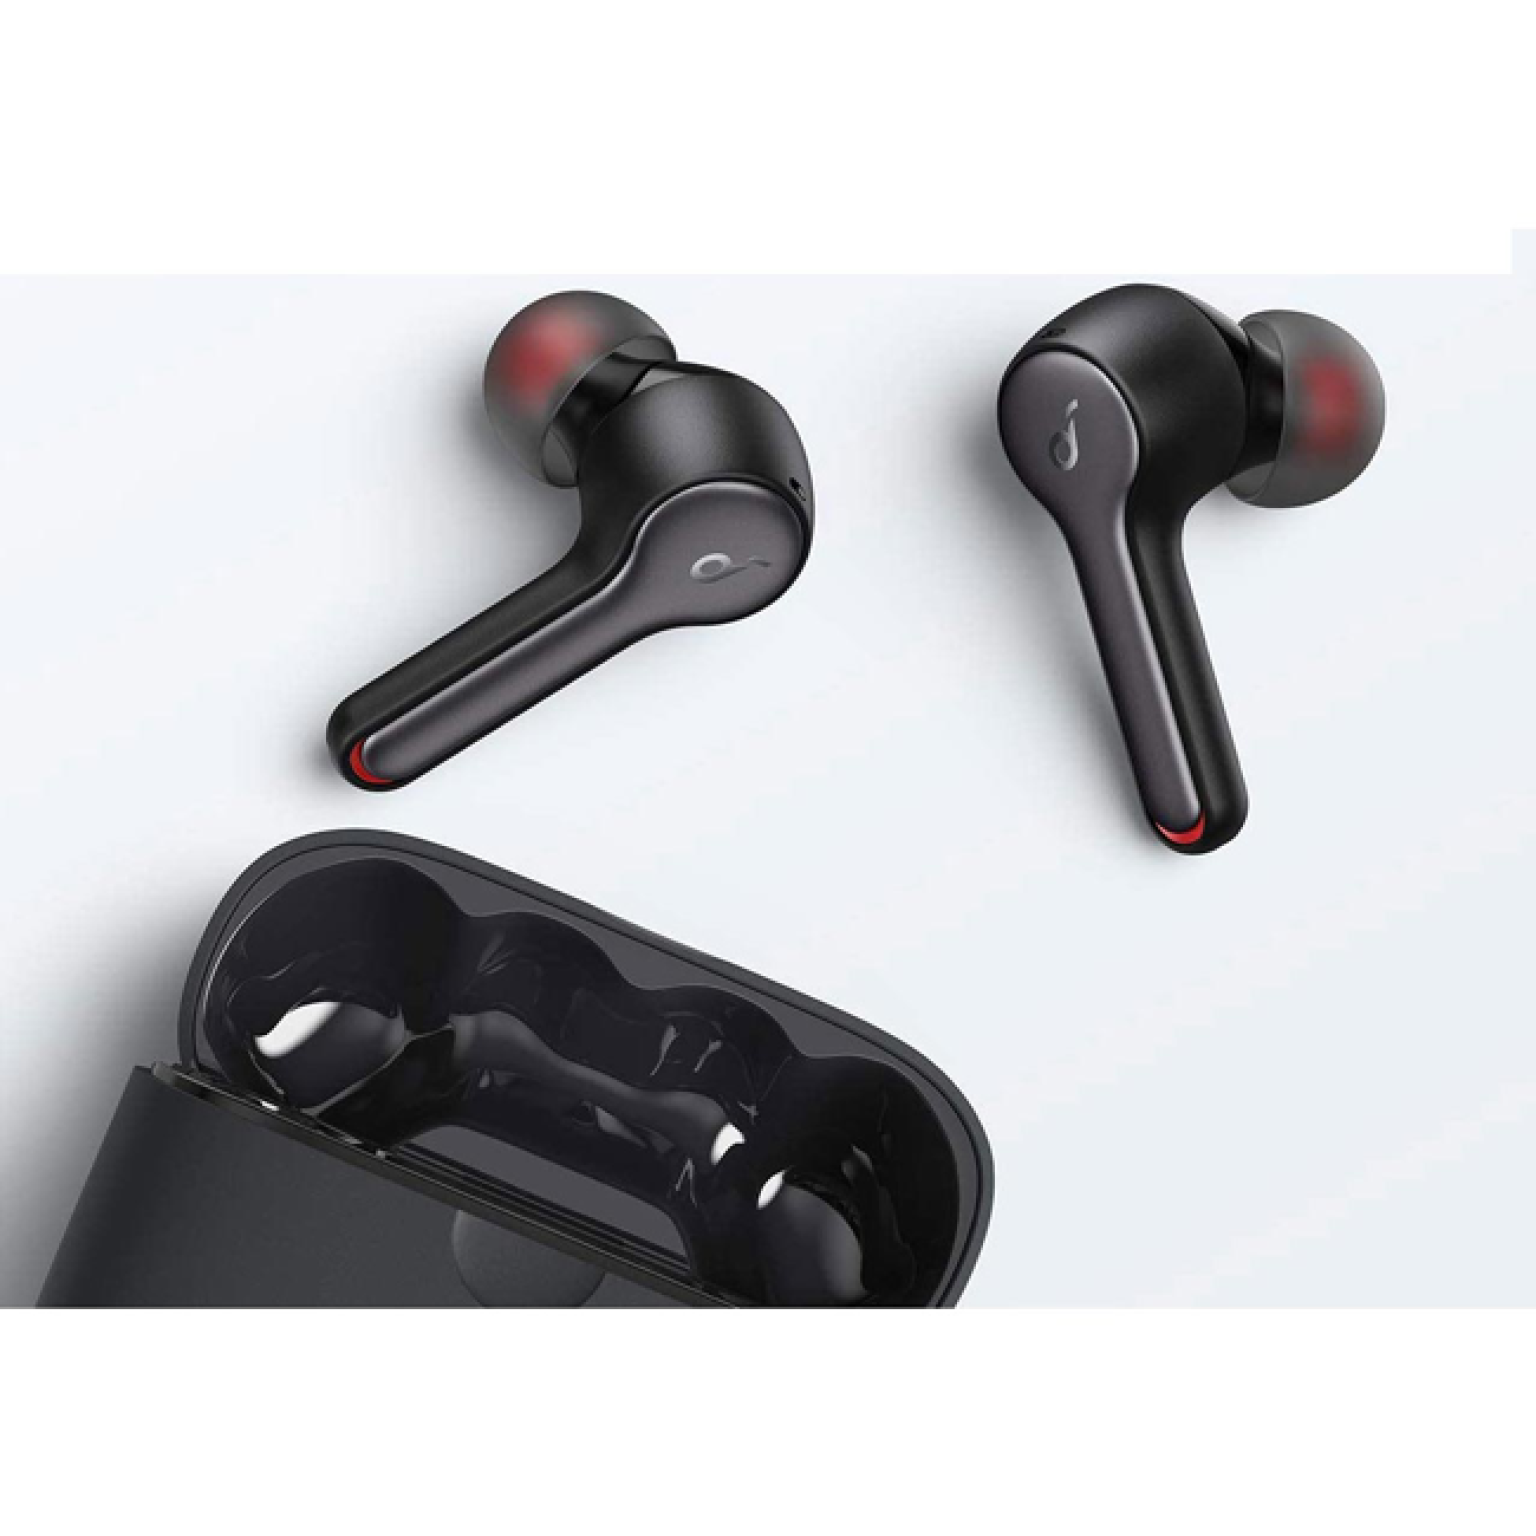 ANKER wireless earbuds LIBERTY AIR 2 A3910 black 5 1